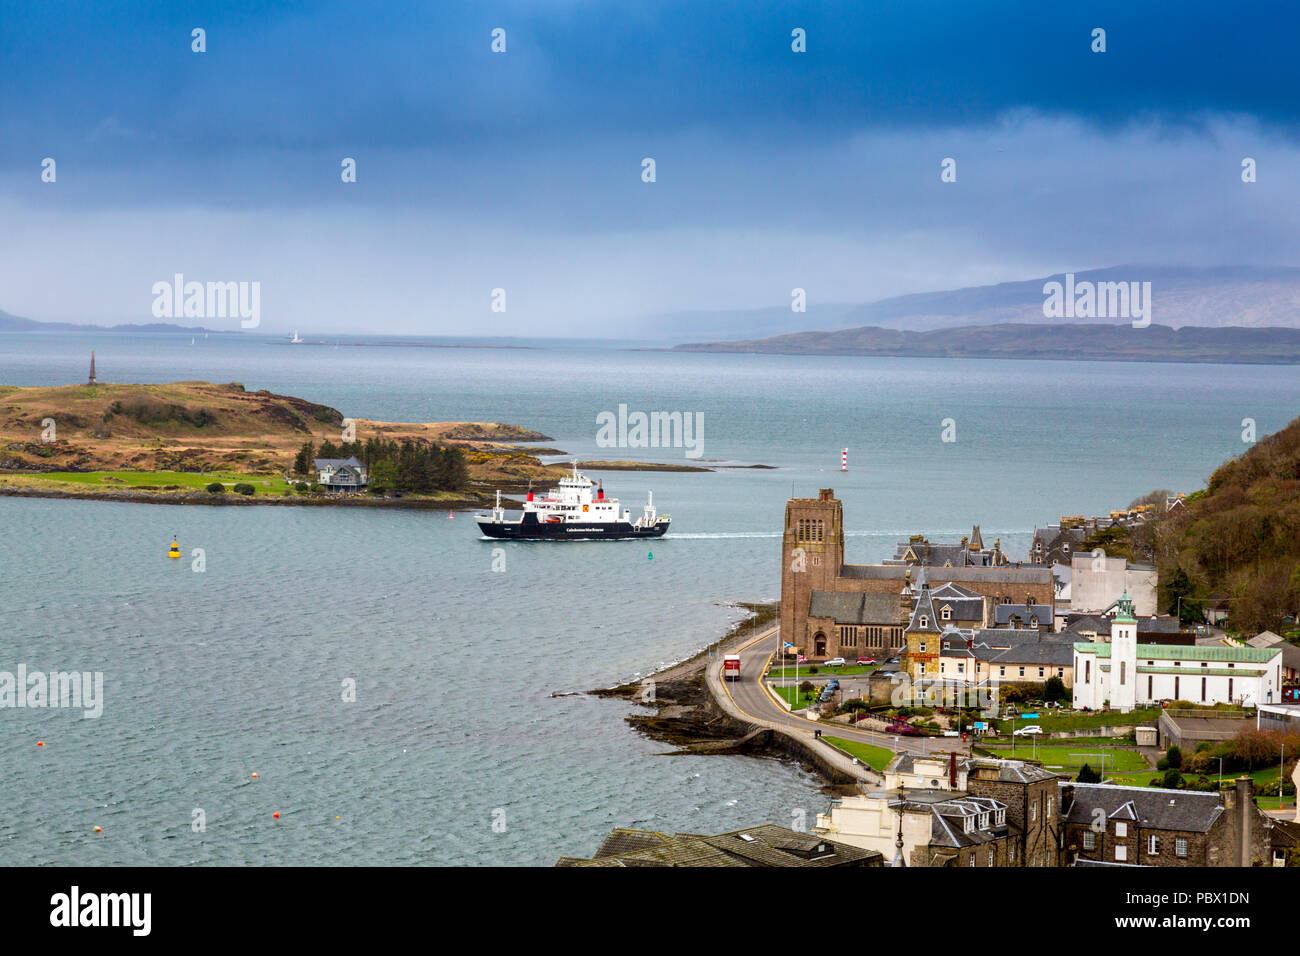 The CalMac ferry 'Coruisk' arriving back in the harbour at Oban from Mull, Argyll and Bute, Scotland, UK Stock Photo